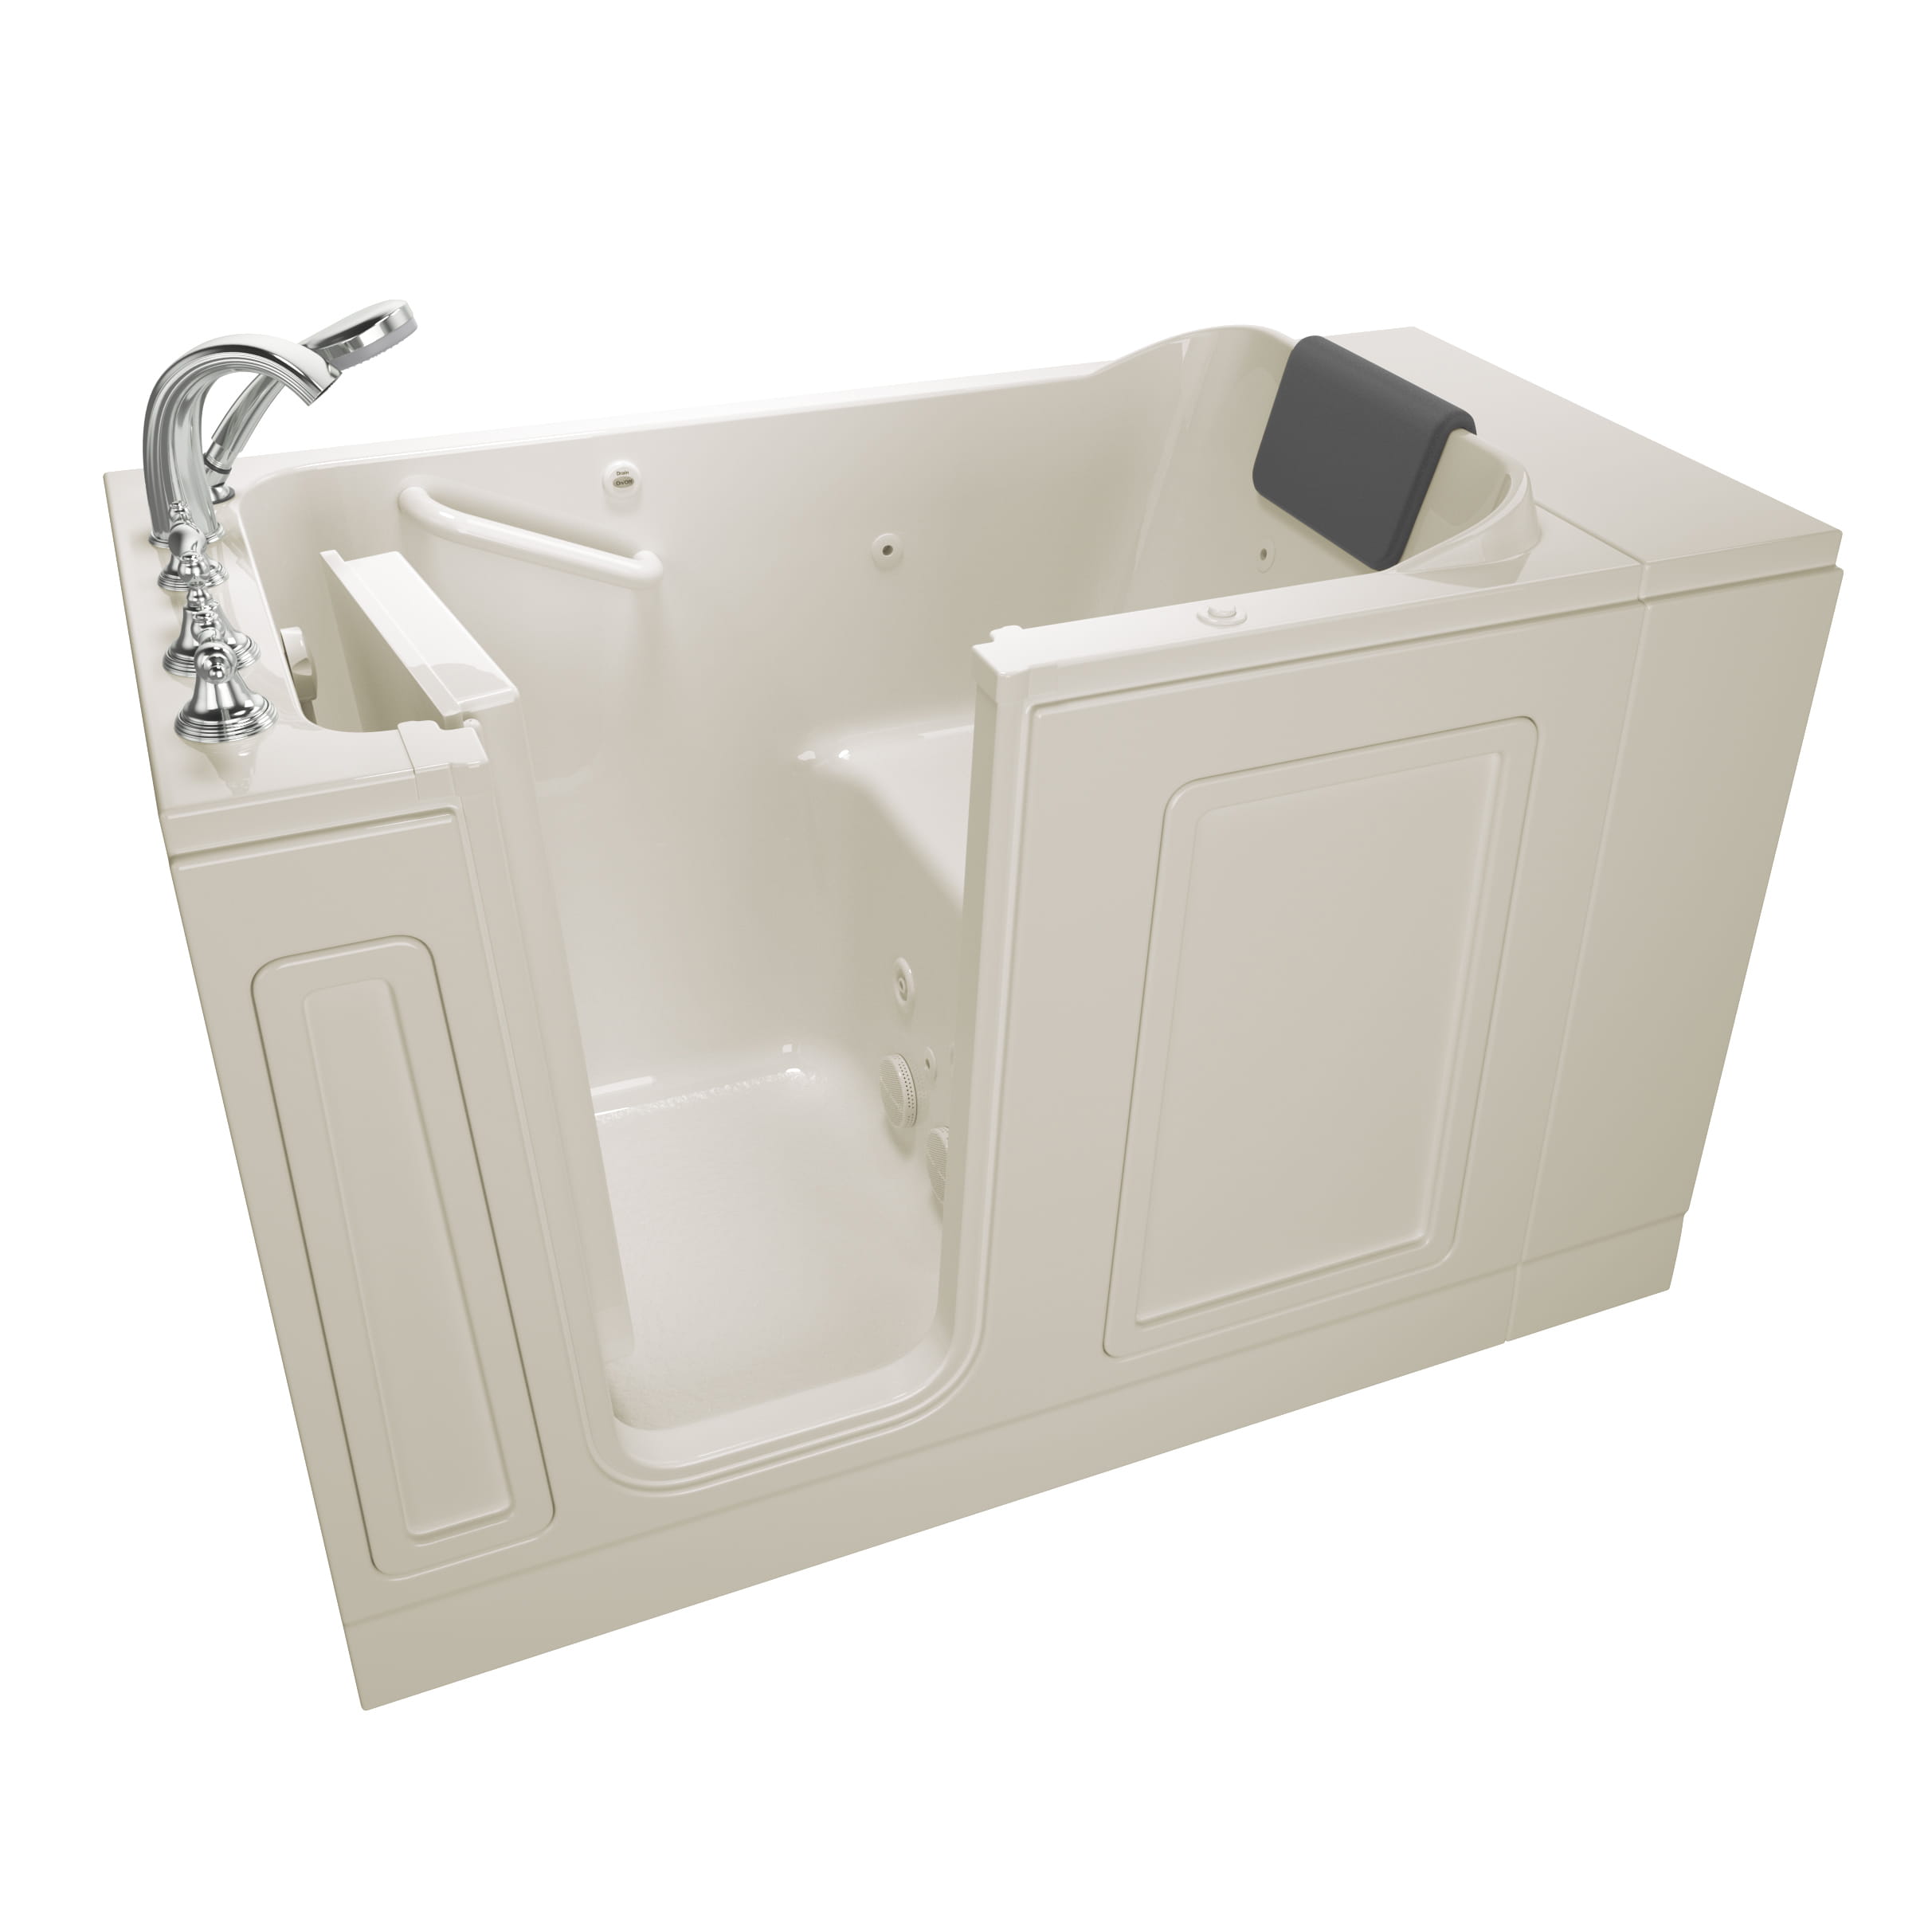 Acrylic Luxury Series 30 x 51  Inch Walk in Tub With Whirlpool System   Left Hand Drain With Faucet WIB LINEN